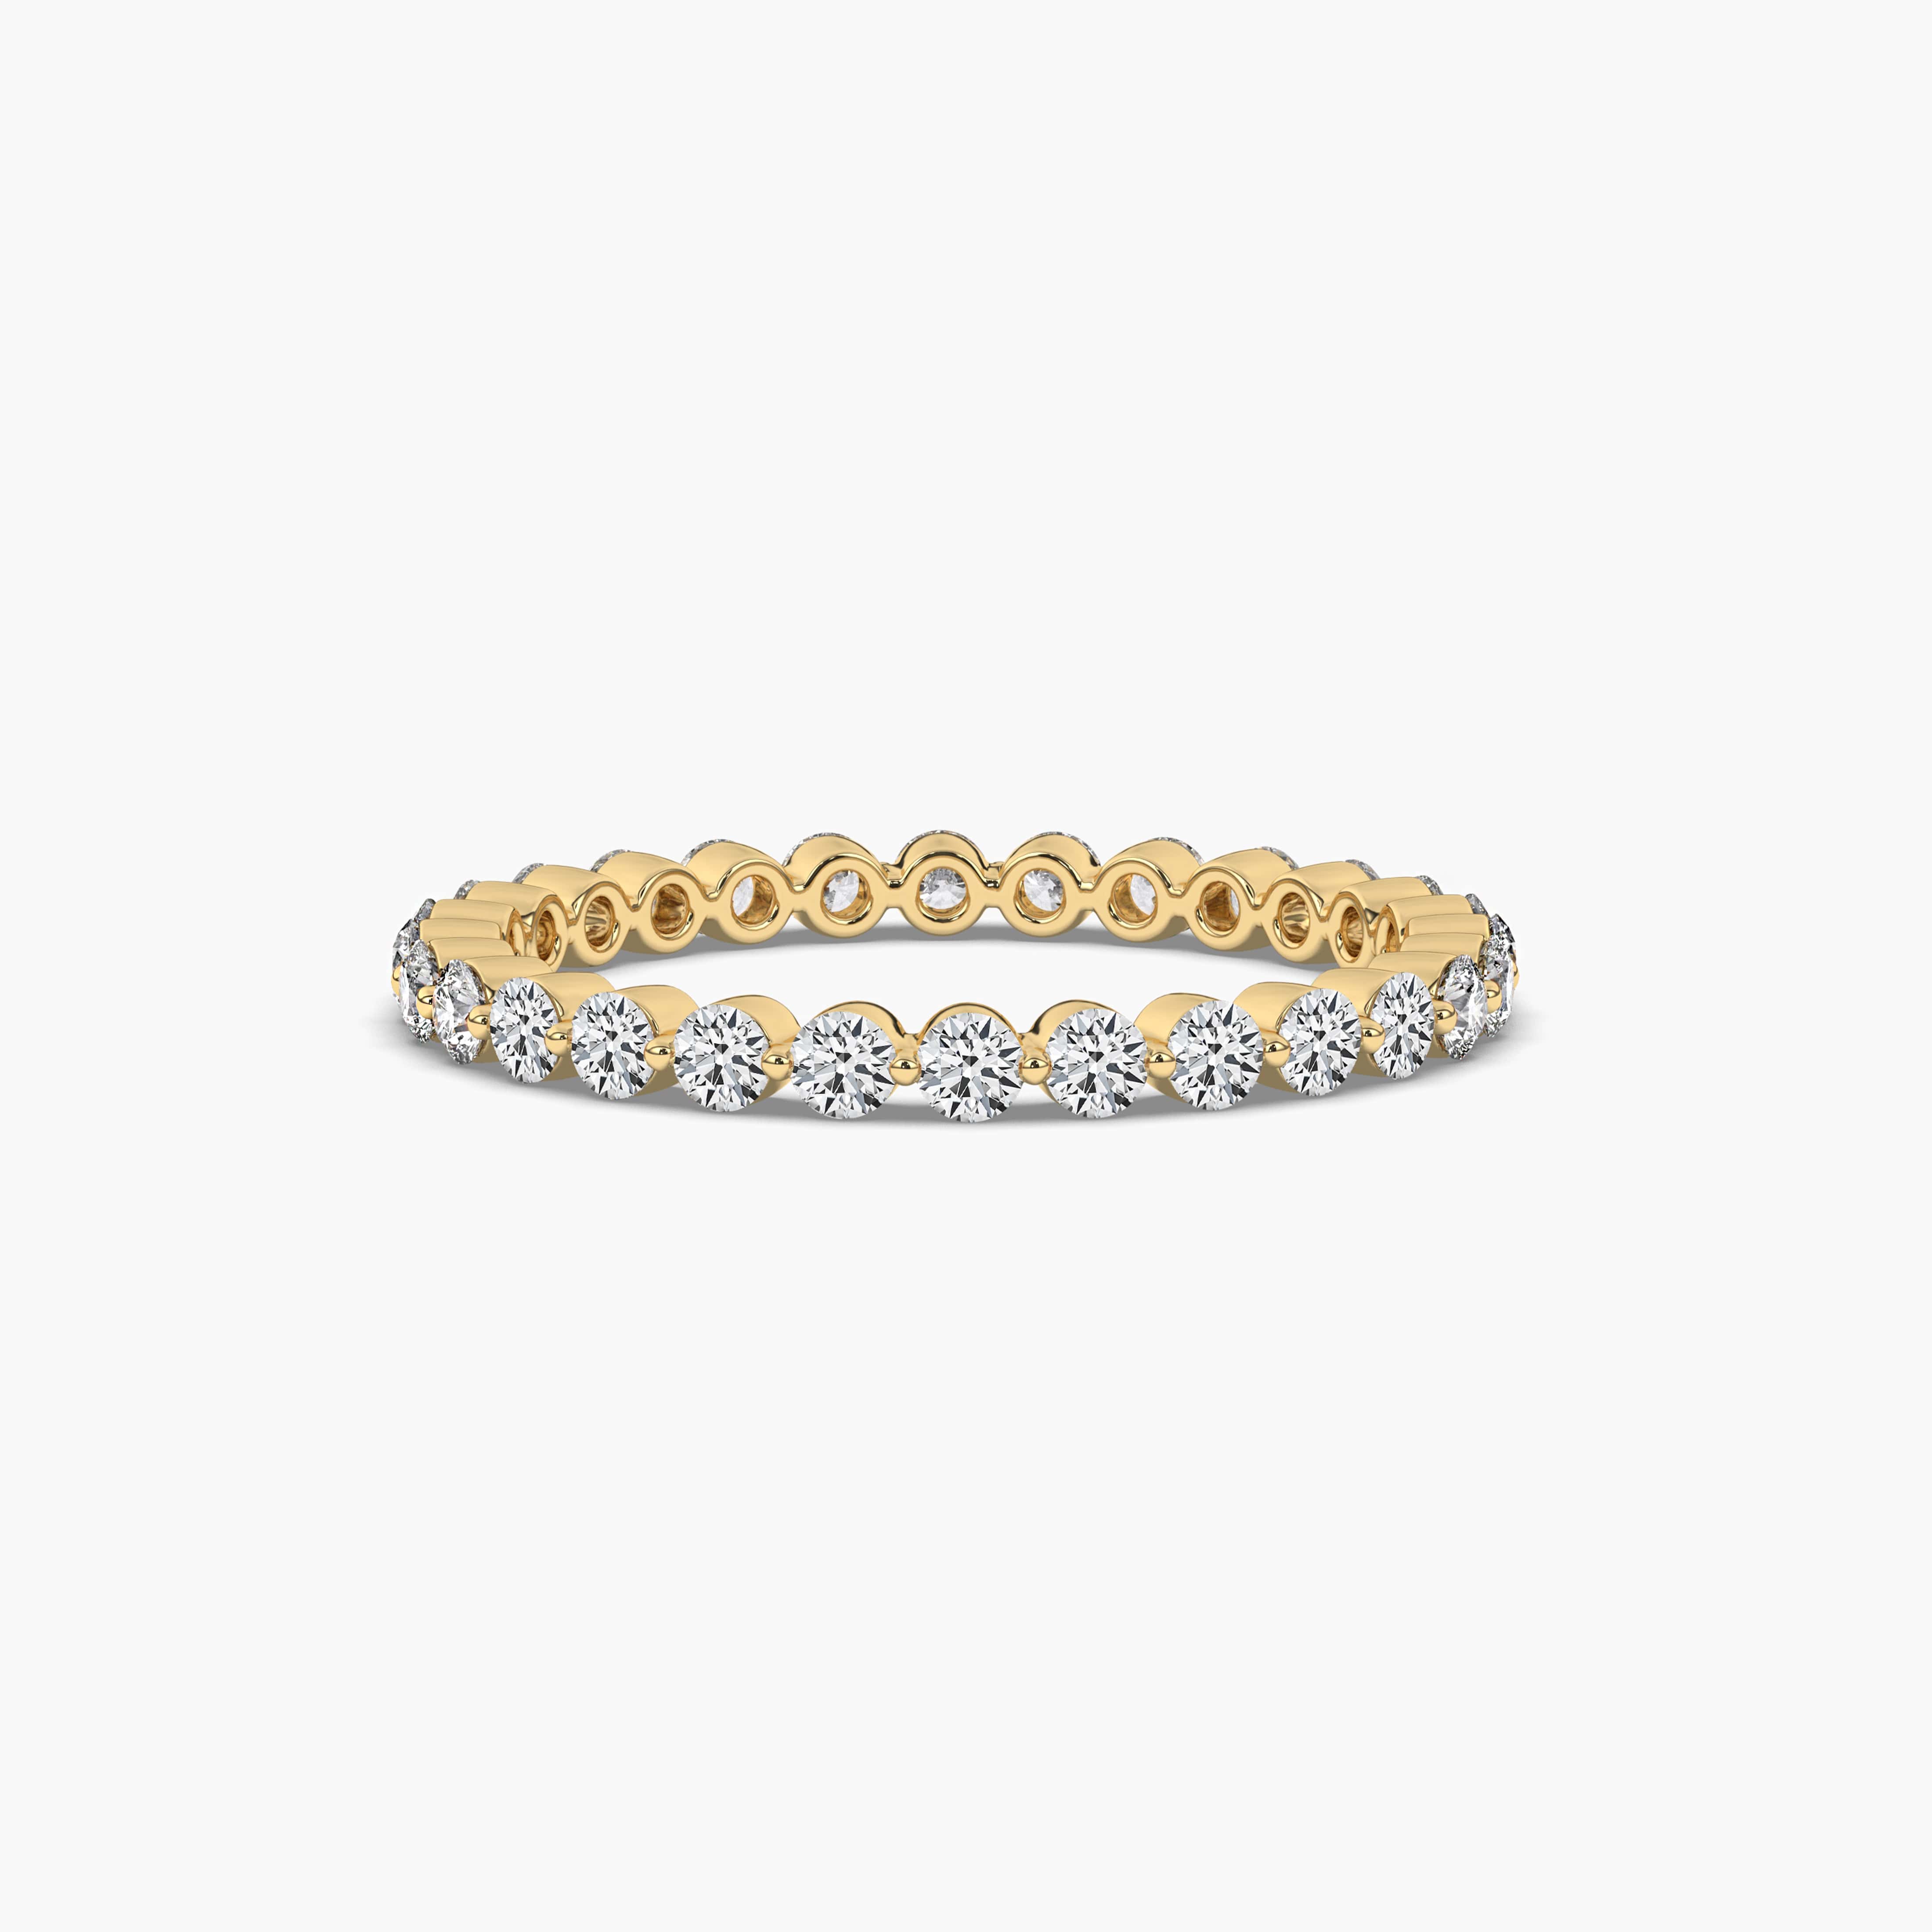 ROUND SHAPE BAR SETTING MOISSANITE ETERNITY BAND IN YELLOW GOLD